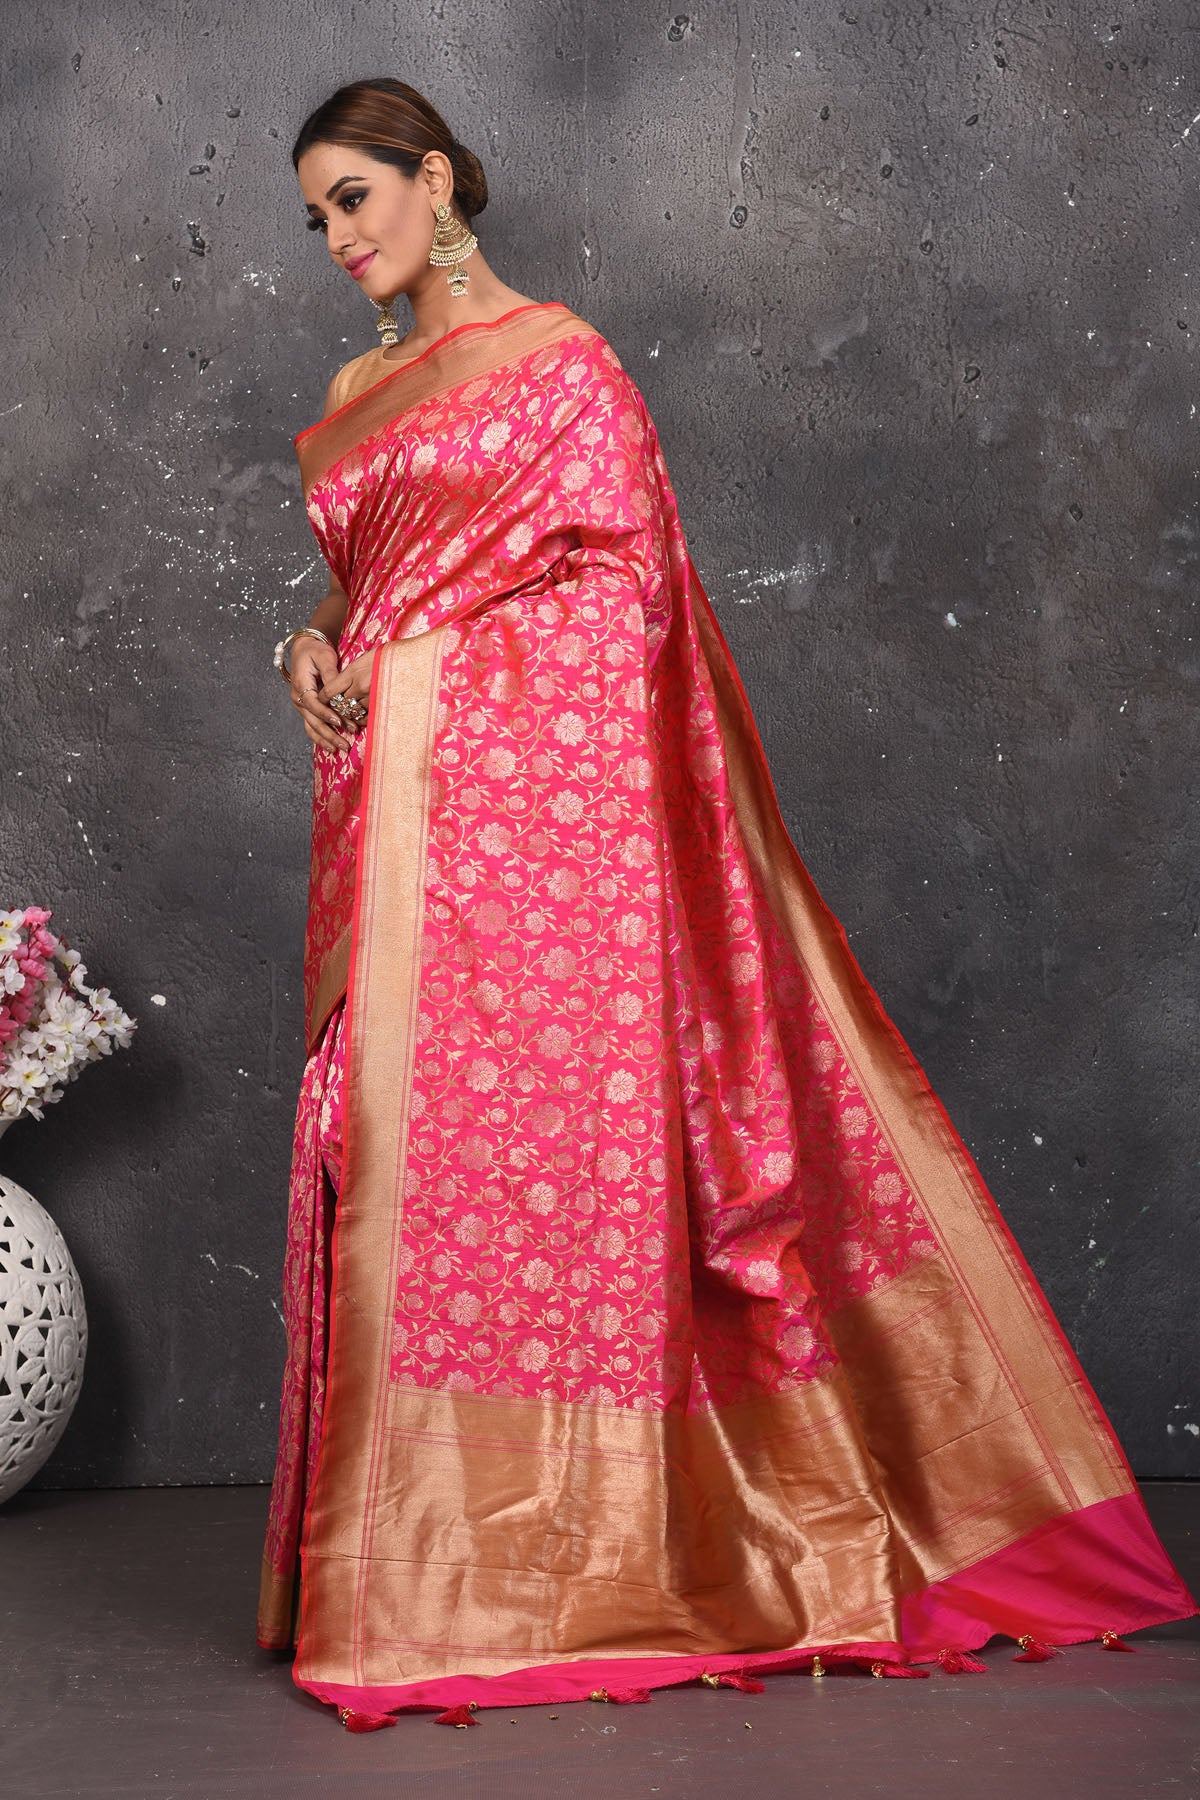 Shop thos elegant pink woven banarasi silk saree with golden zari work online in USA. With exquisite design spread across the length of the saree, it is perfect for any occasion which has a beautiful floral pattern zari work with blend of gold colour. Pair this silk banarasi silk sari with heels and a moti necklace from Pure Elegance Indian fashion store in USA.- Full view with folded hands.